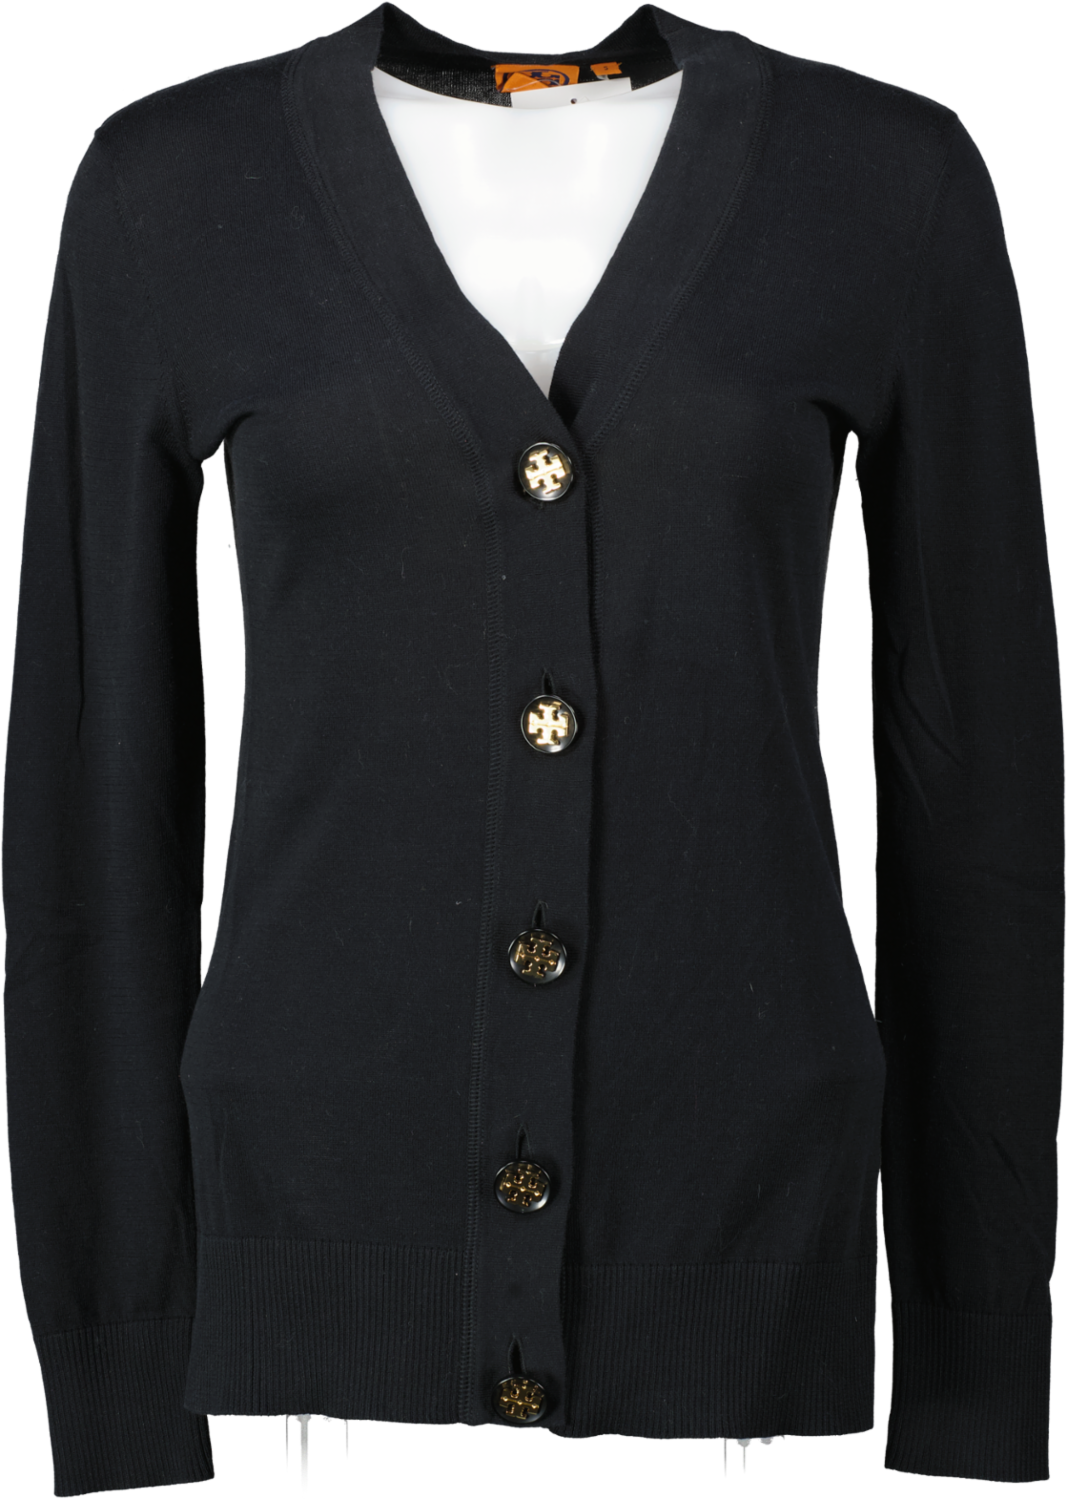 Tory Burch Black Cotton V-neck Cardigan With Logo Buttons UK S